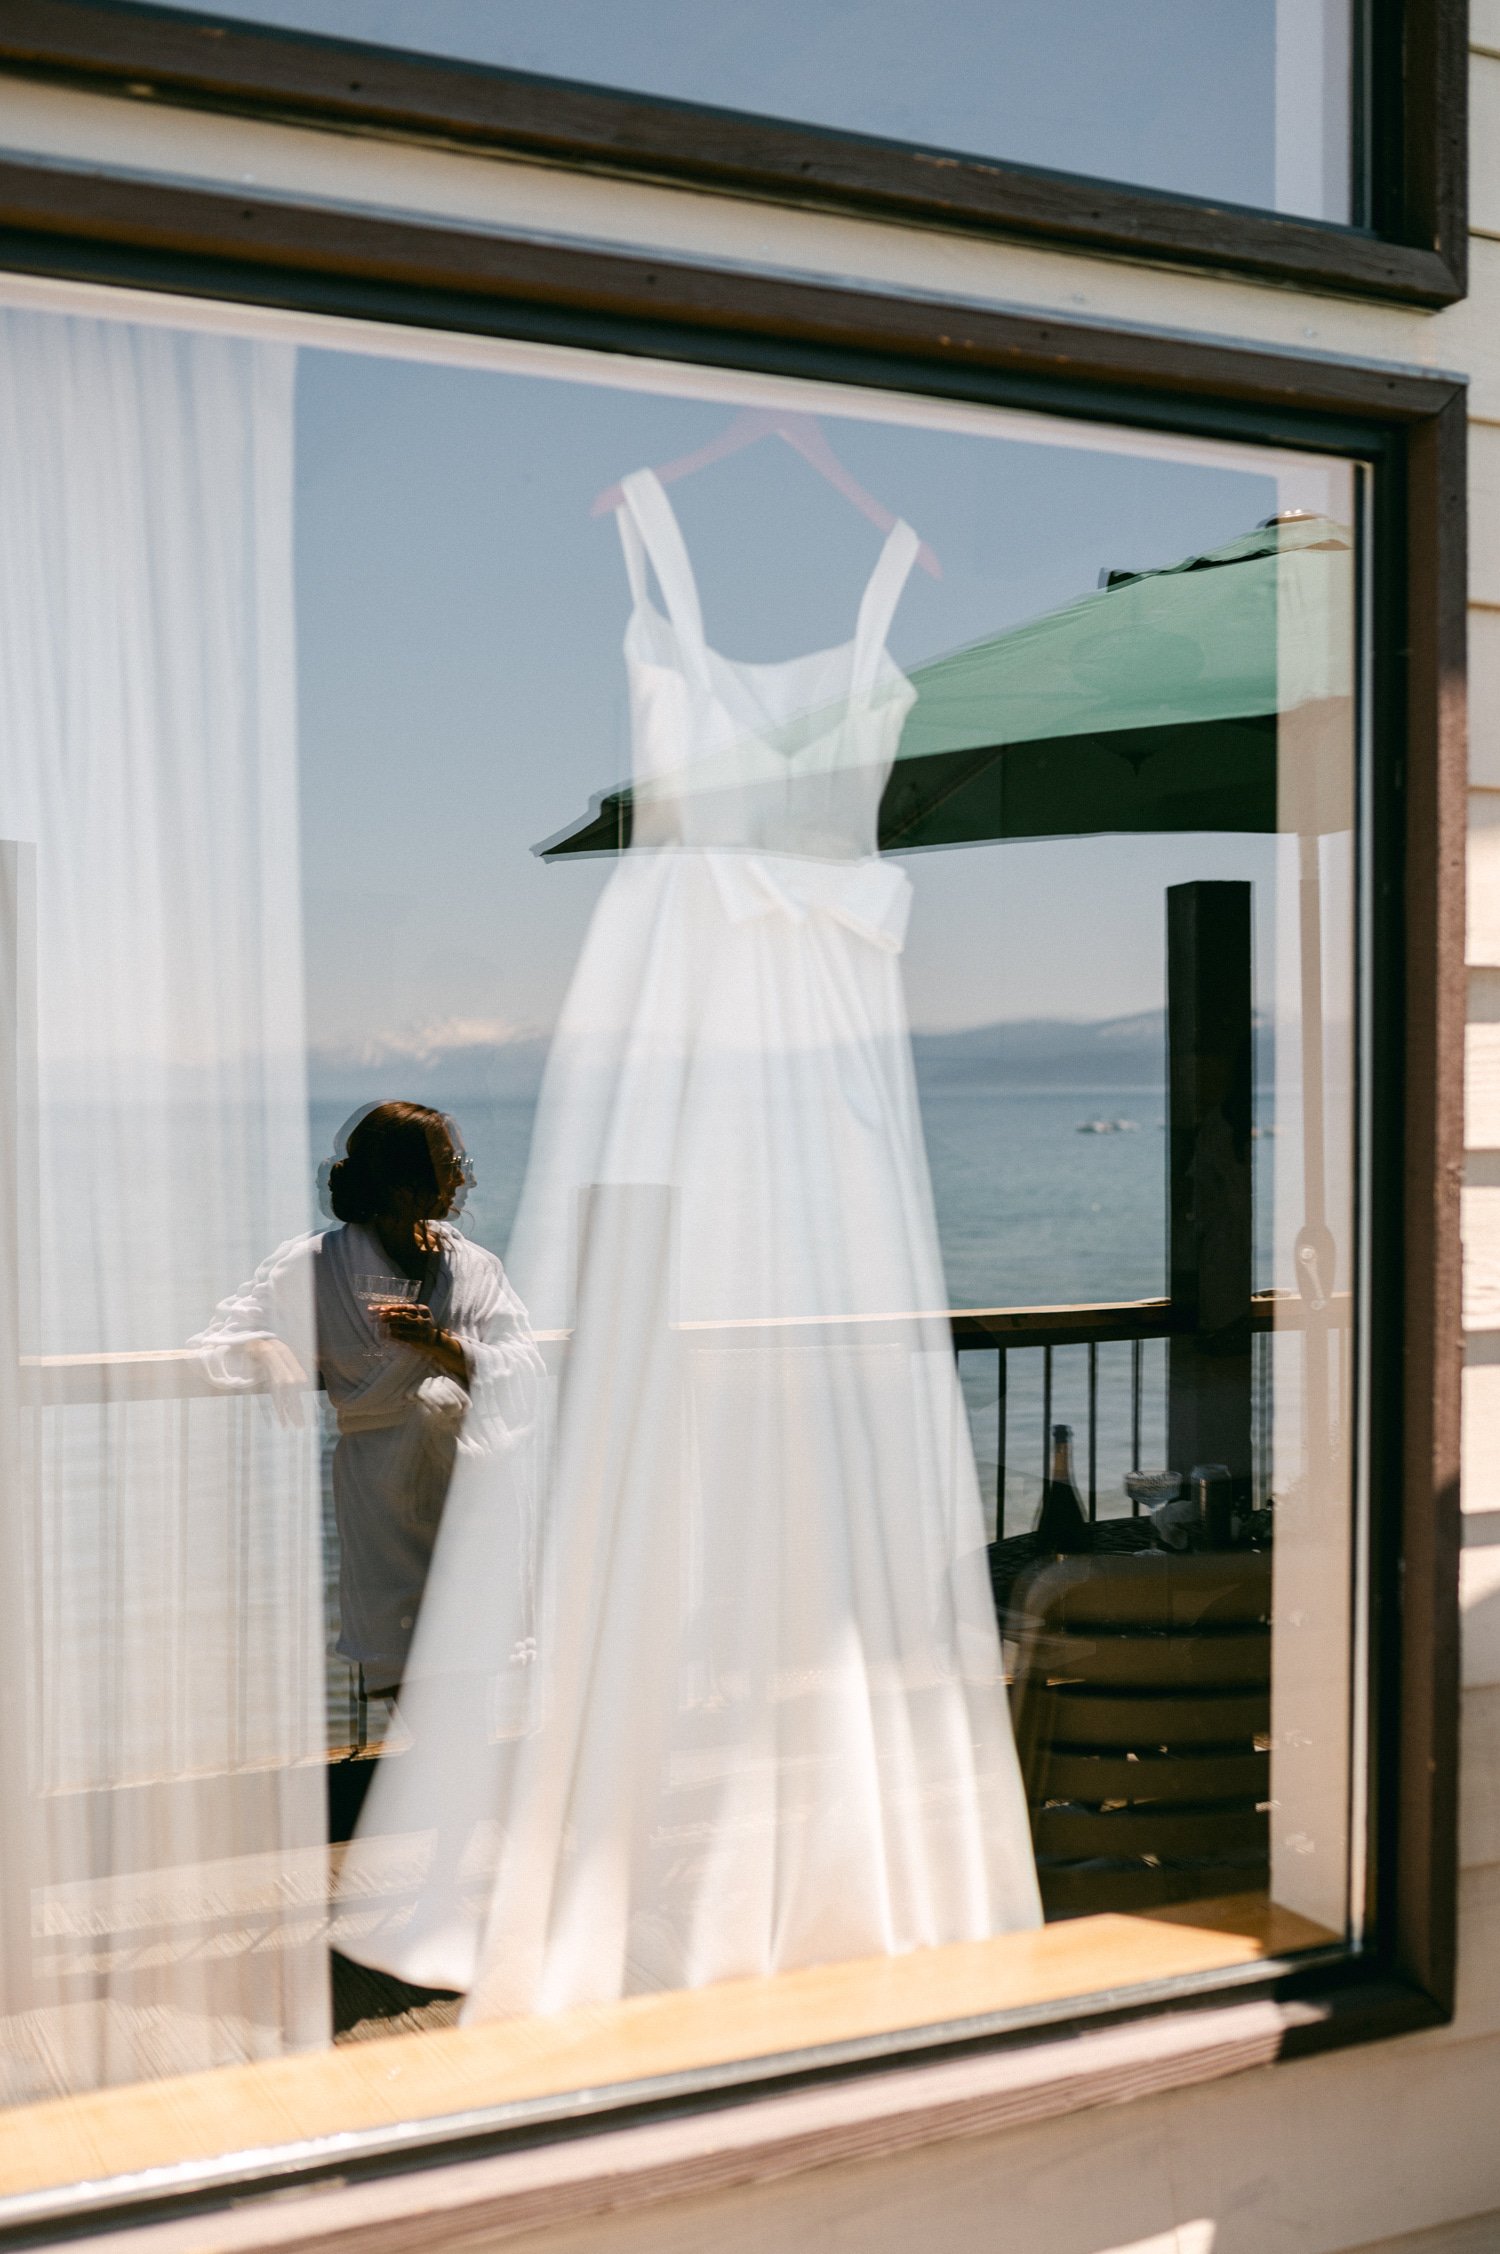 tahoe event center - lake tahoe wedding, photo of the wedding dress by the window